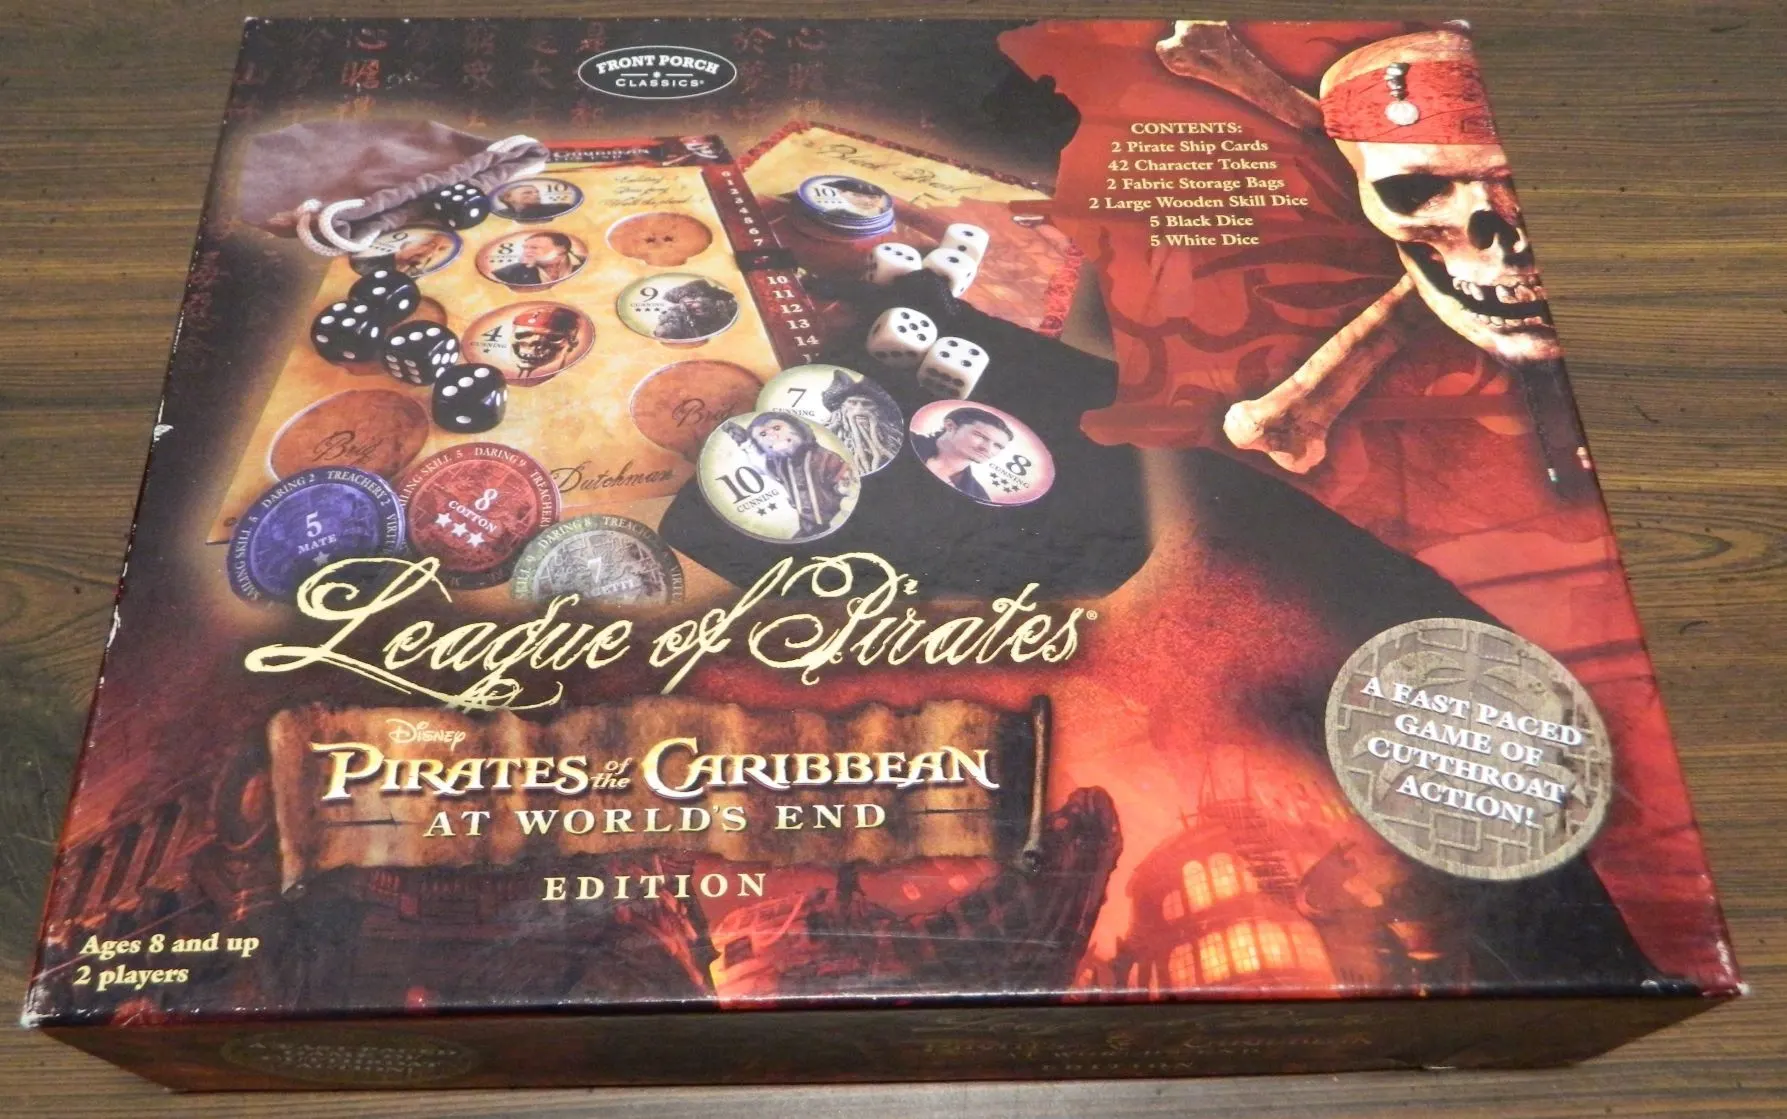 Box for League of Pirates